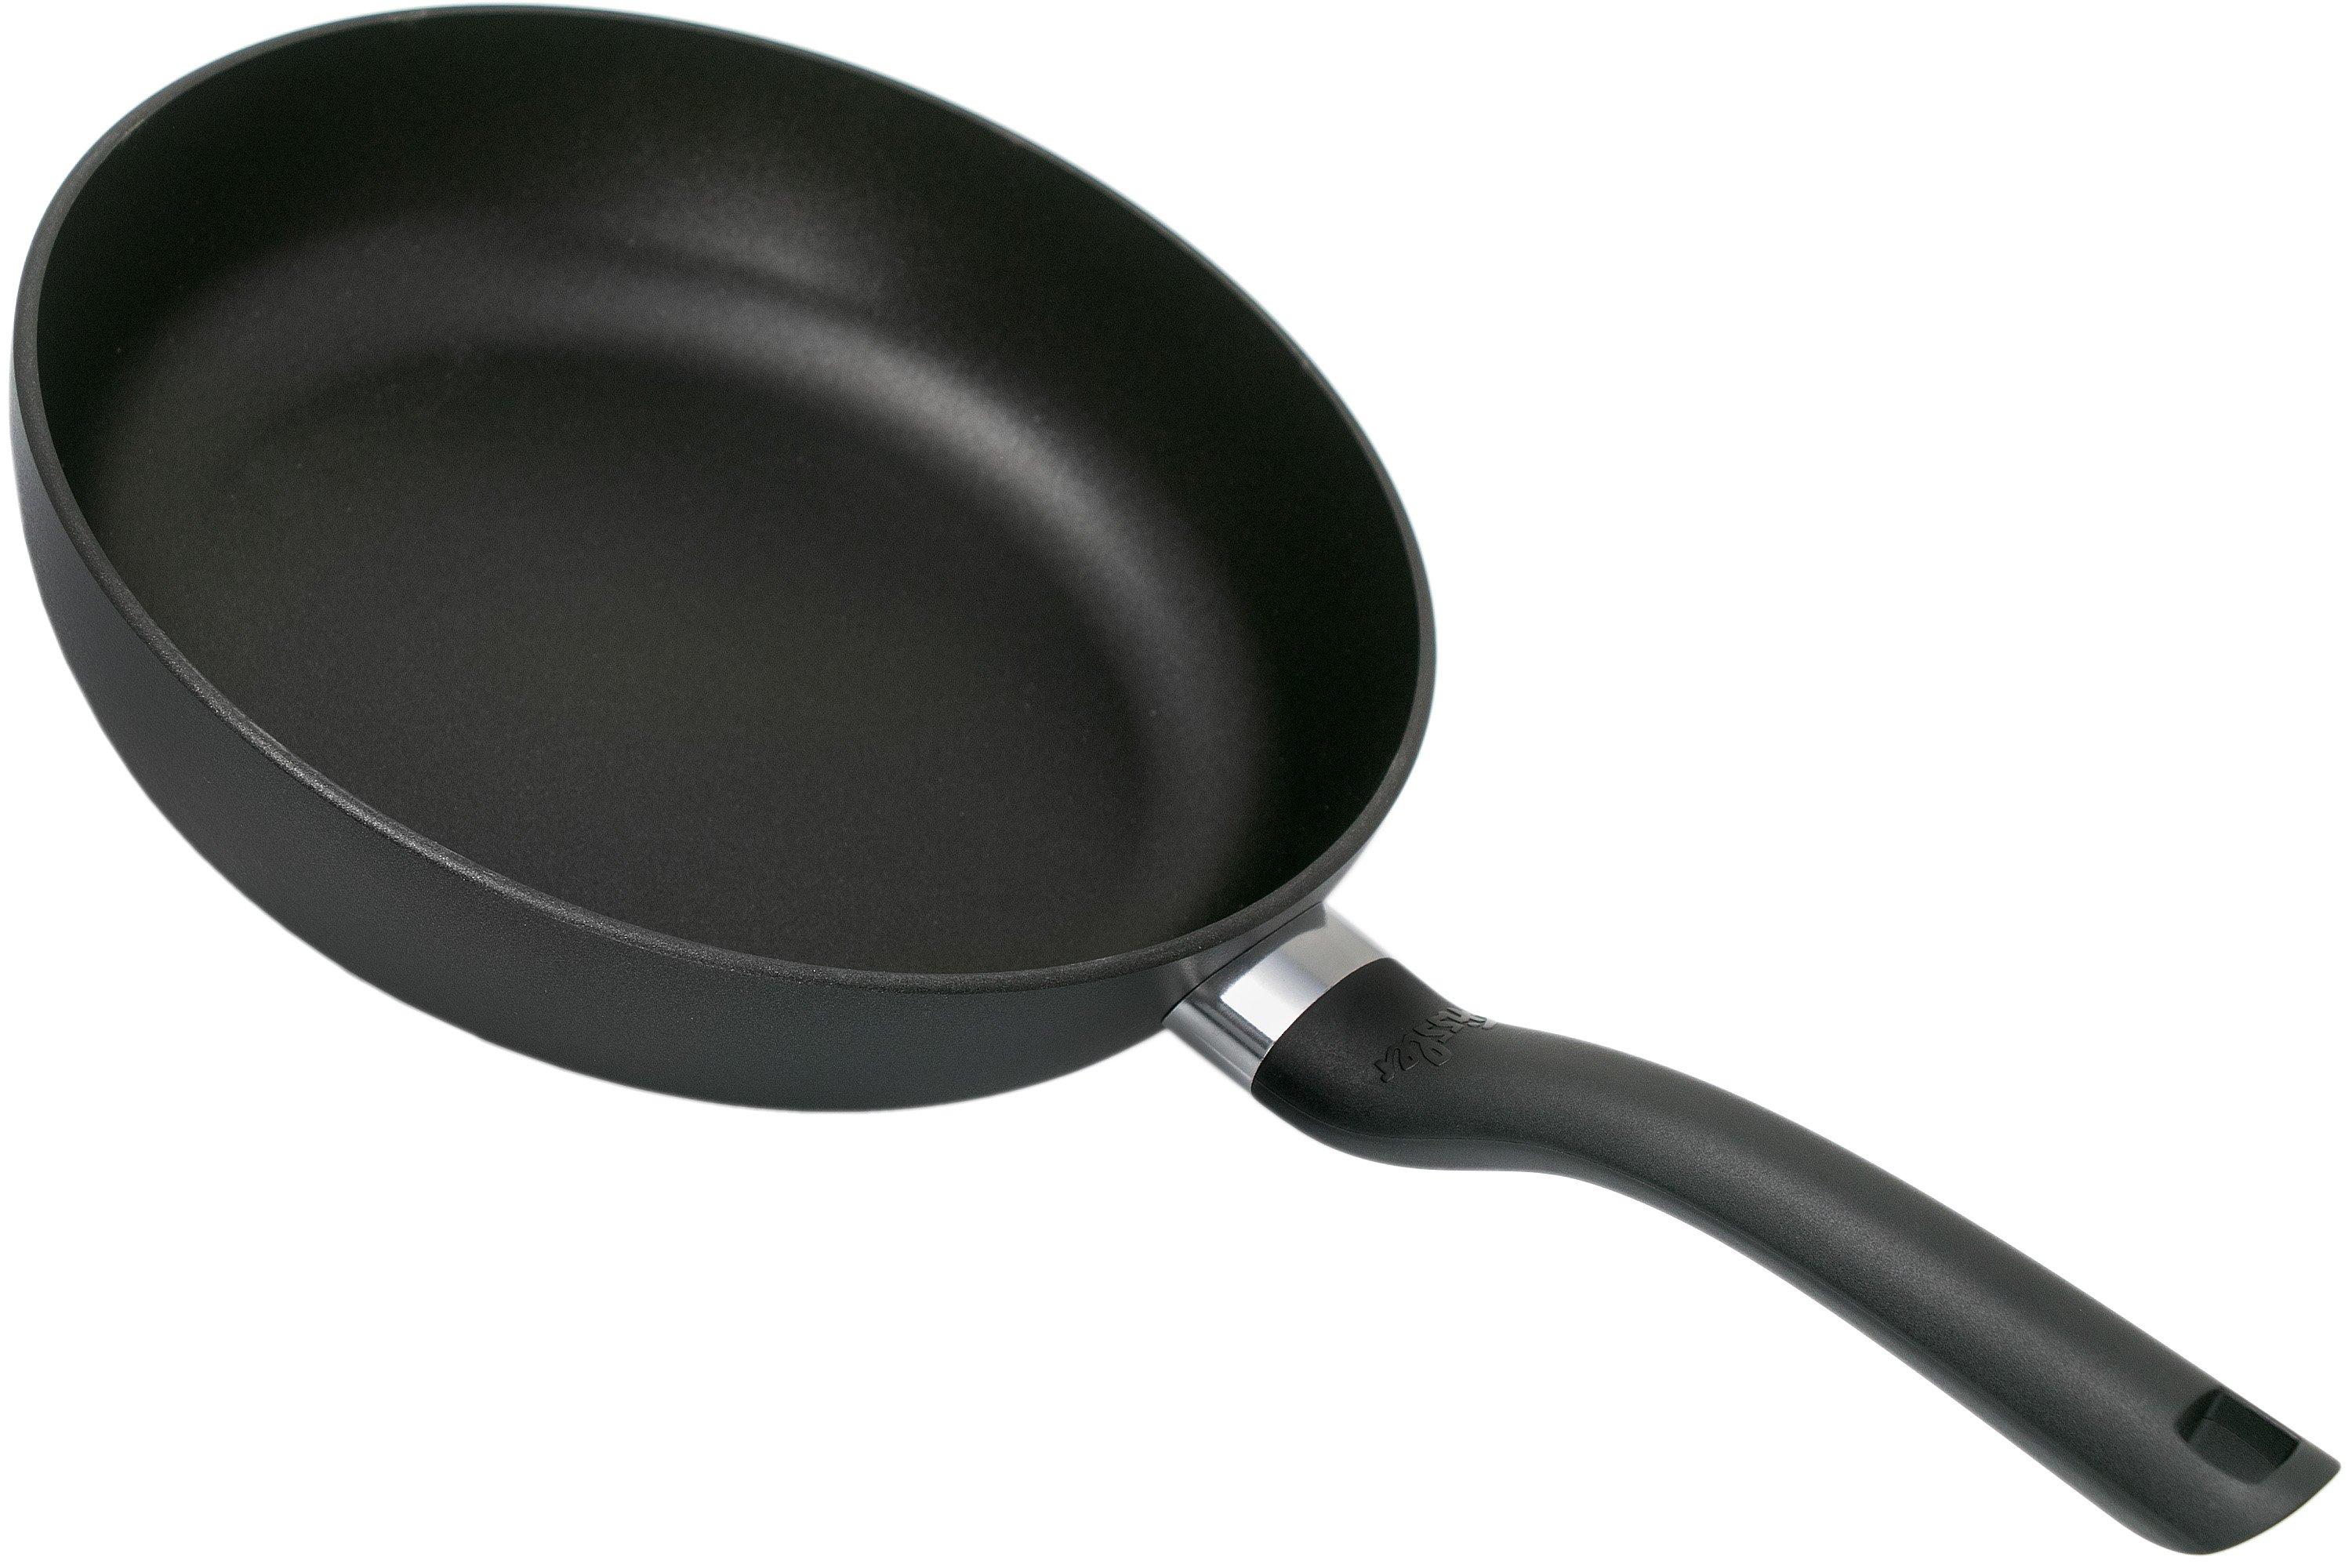 Fissler Cenit 045-300-24-100, 24 cm frying pan | Advantageously shopping at